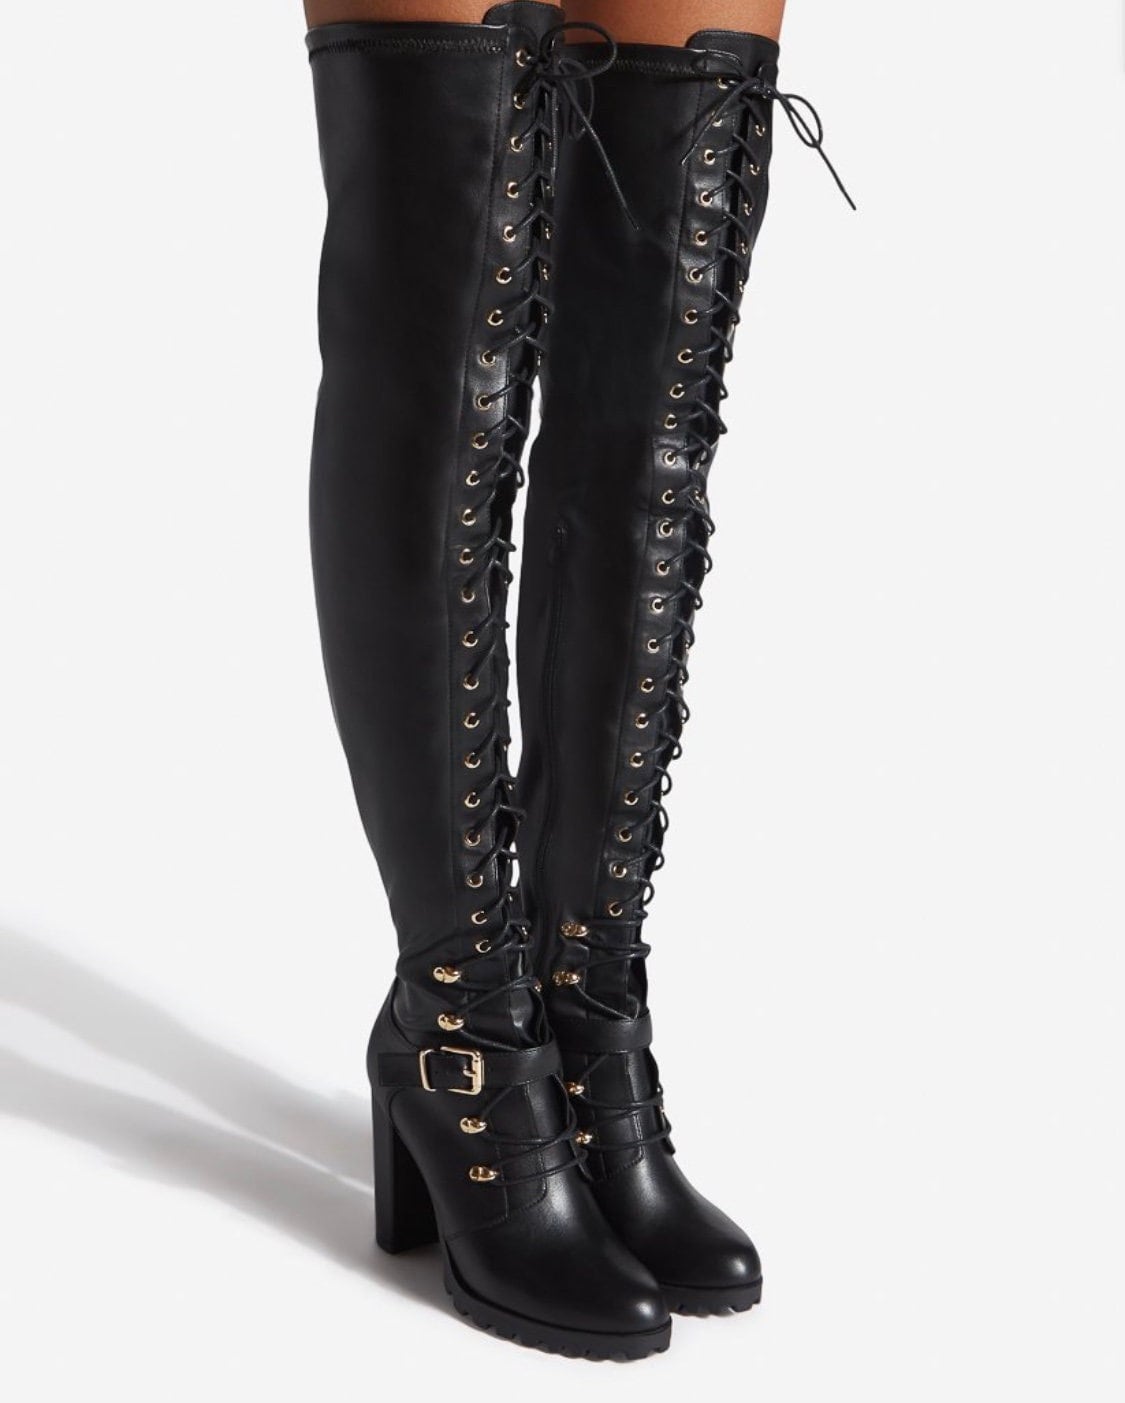 Pair of Thigh-style Boot, Sexy Combat Boot Look. Climb High on the ...